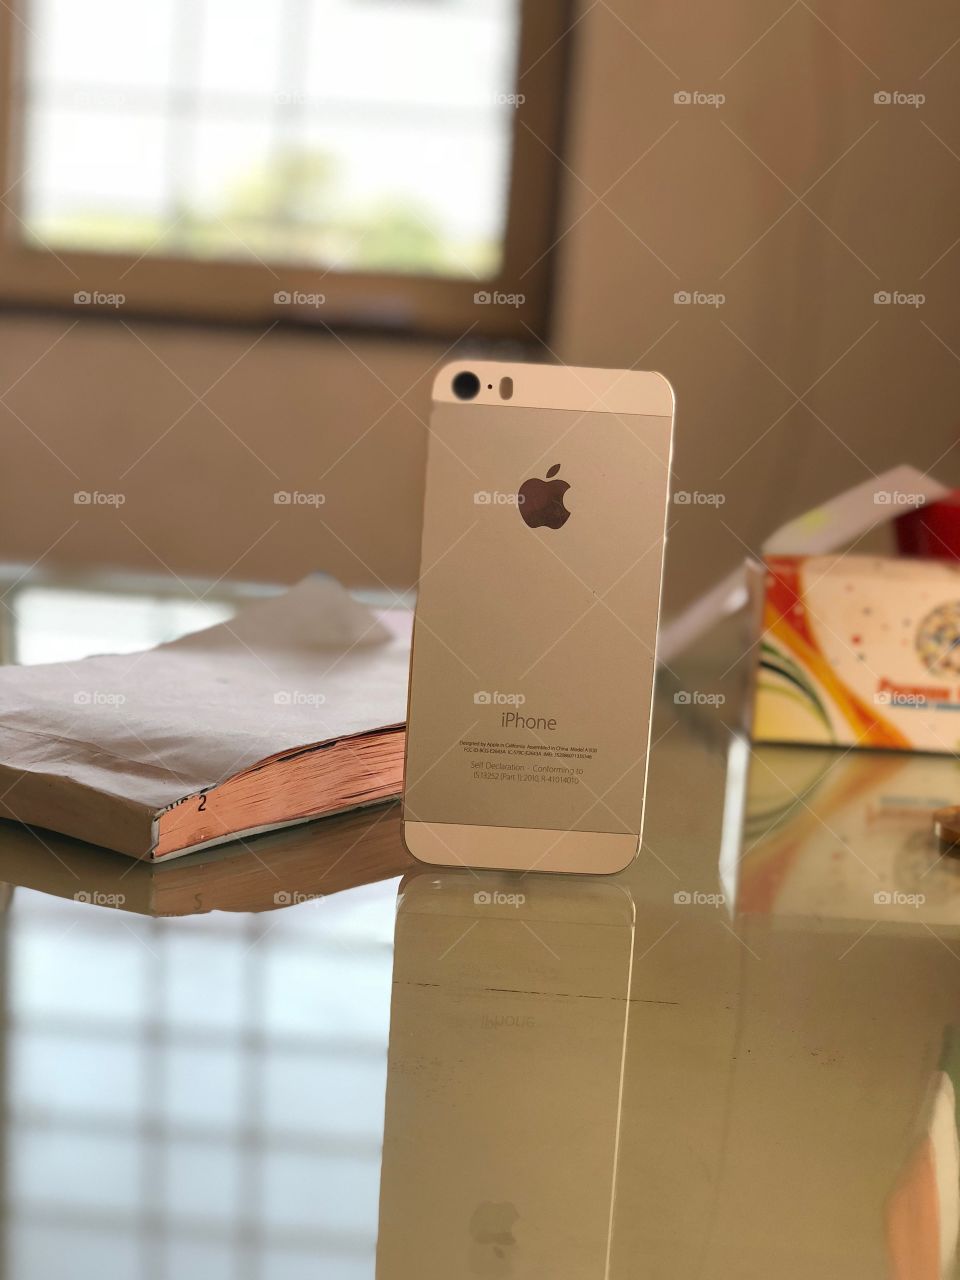 My apple phone in portrait mode photo l love this phone a compact phone for use lovely to capture photos 